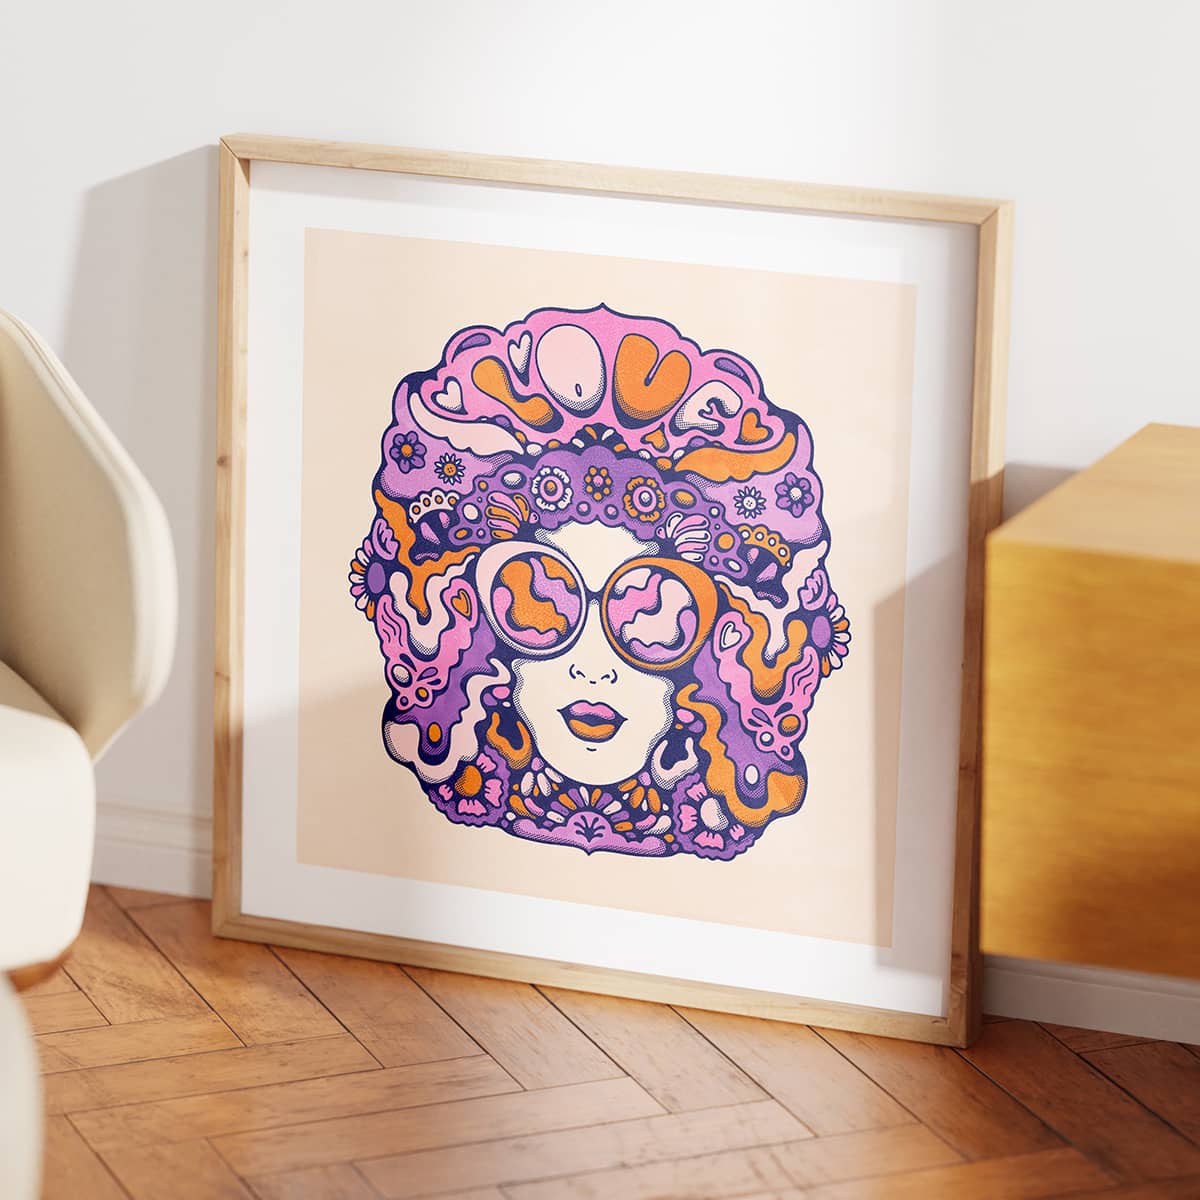 Graphic art 70s style poster of a female portrait, in a light wooden frame